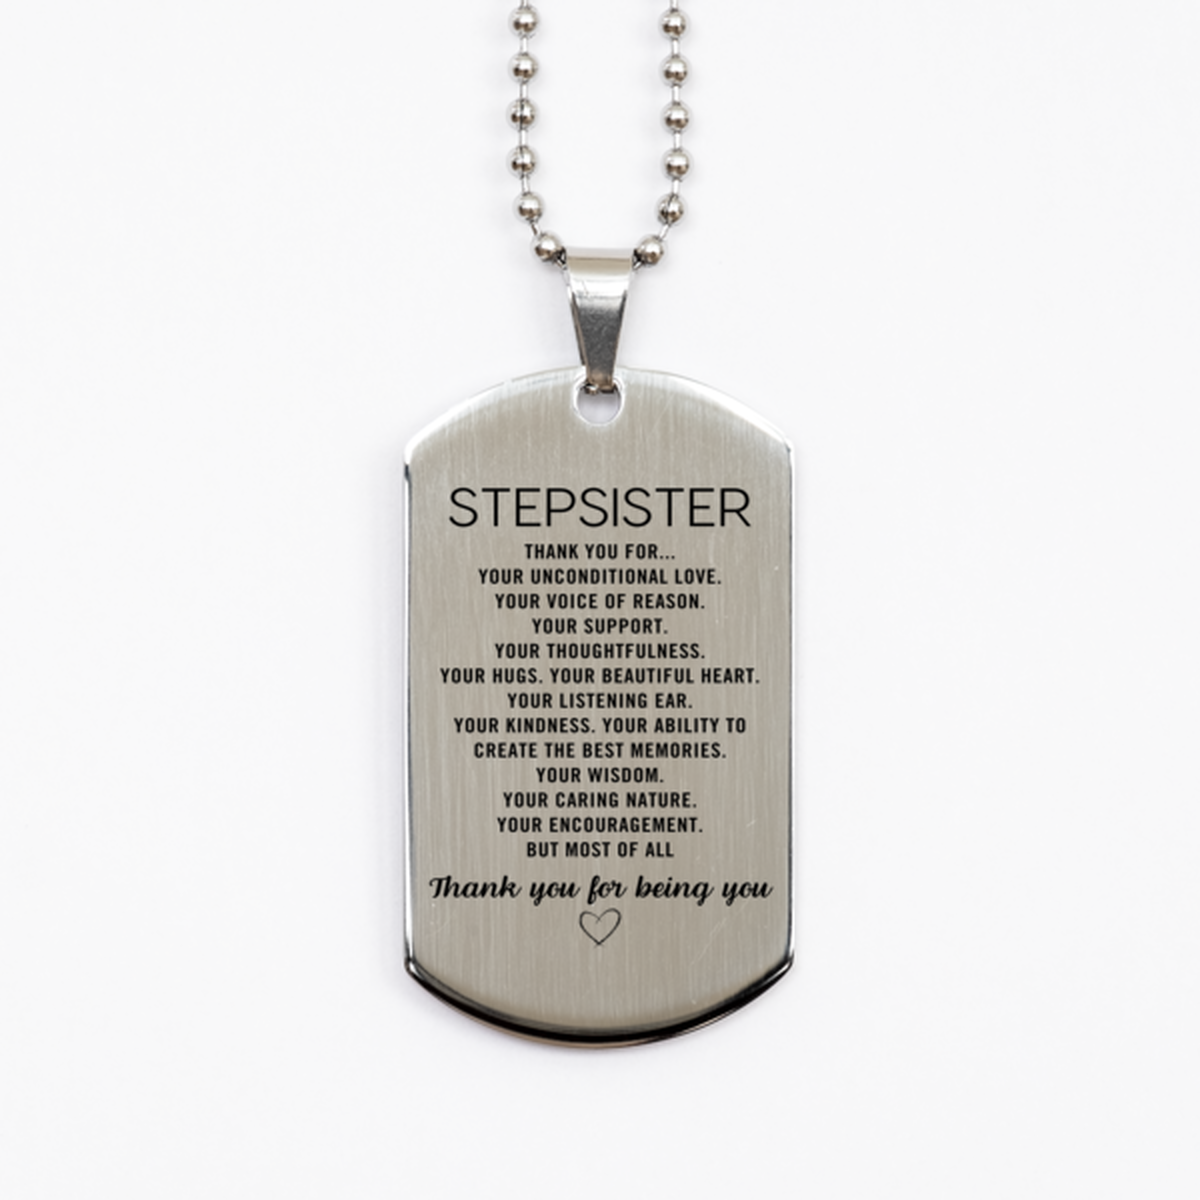 Stepsister Silver Dog Tag Custom, Engraved Gifts For Stepsister Christmas Graduation Birthday Gifts for Men Women Stepsister Thank you for Your unconditional love